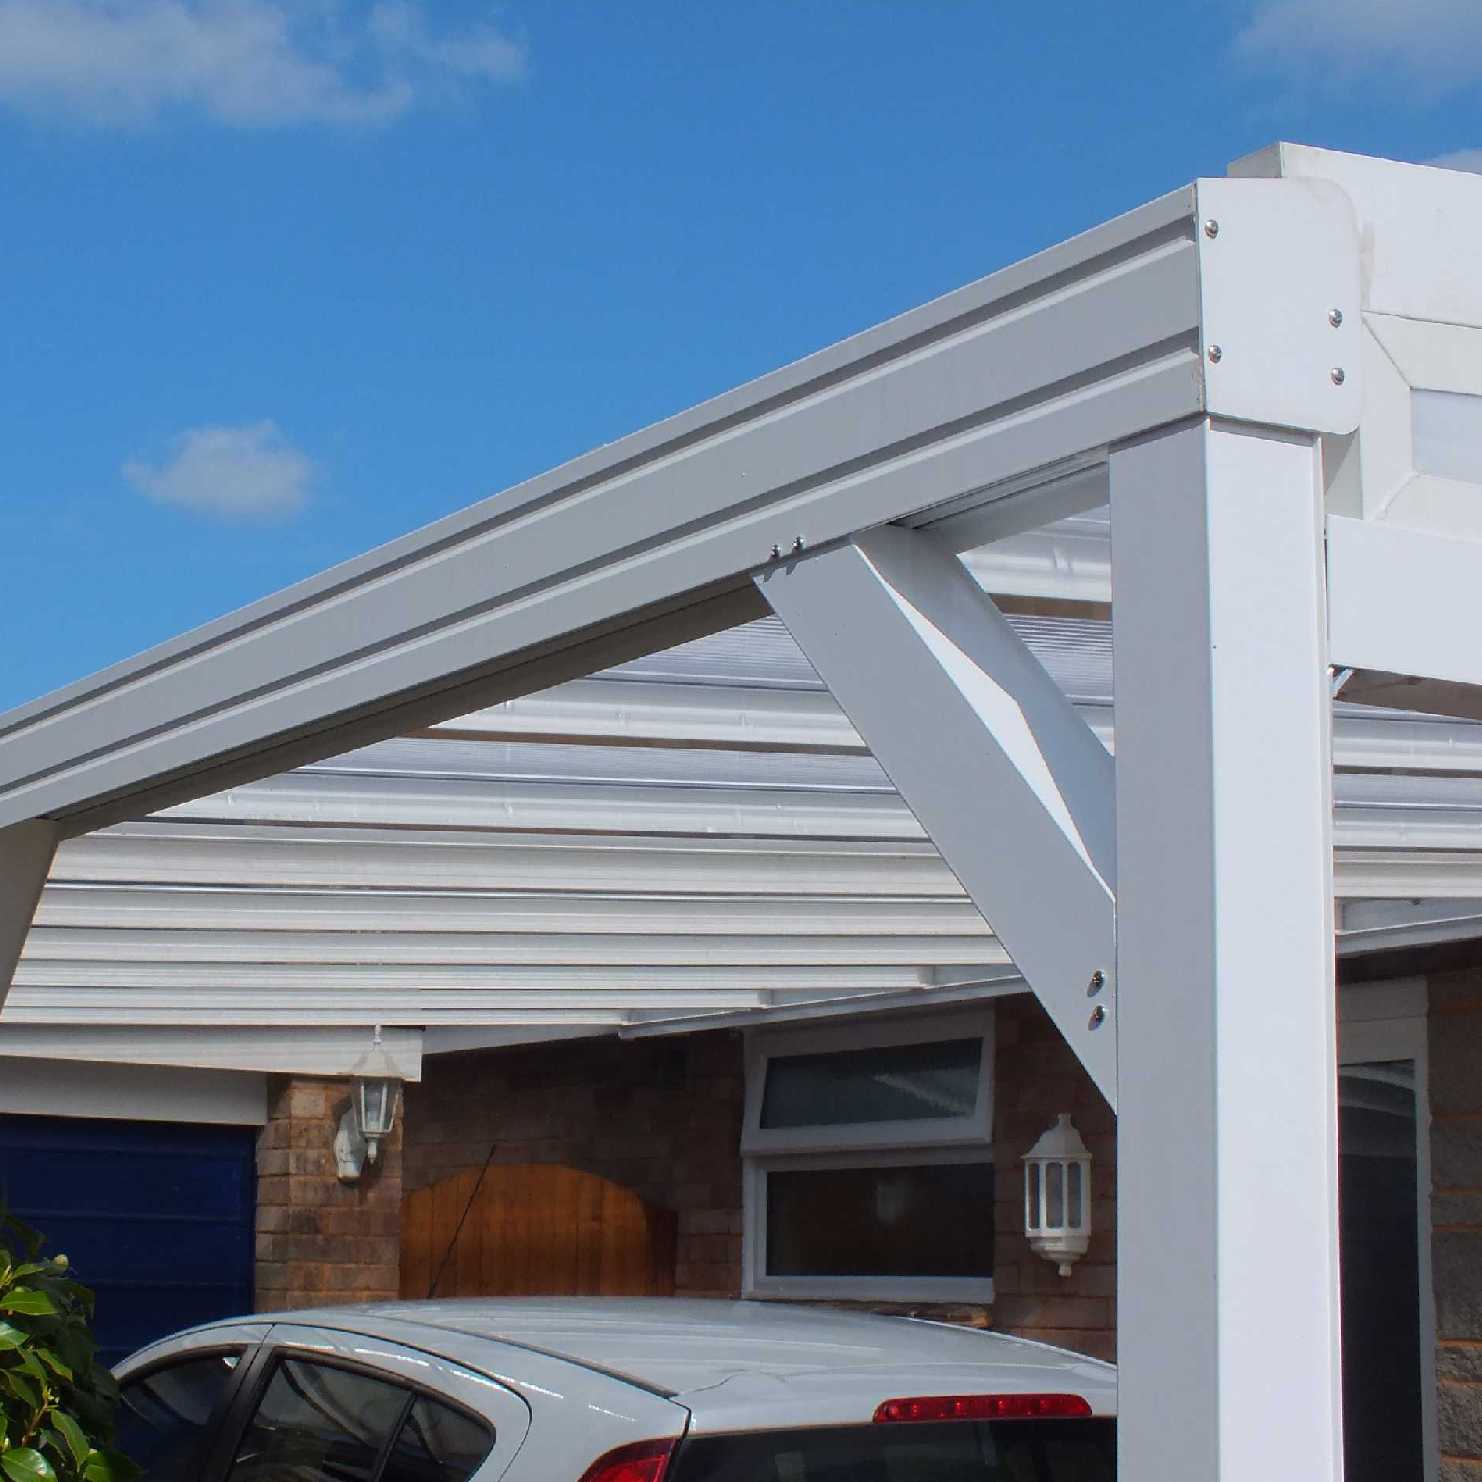 Buy Omega Smart Lean-To Canopy, White with 16mm Polycarbonate Glazing - 3.5m (W) x 4.0m (P), (3) Supporting Posts online today